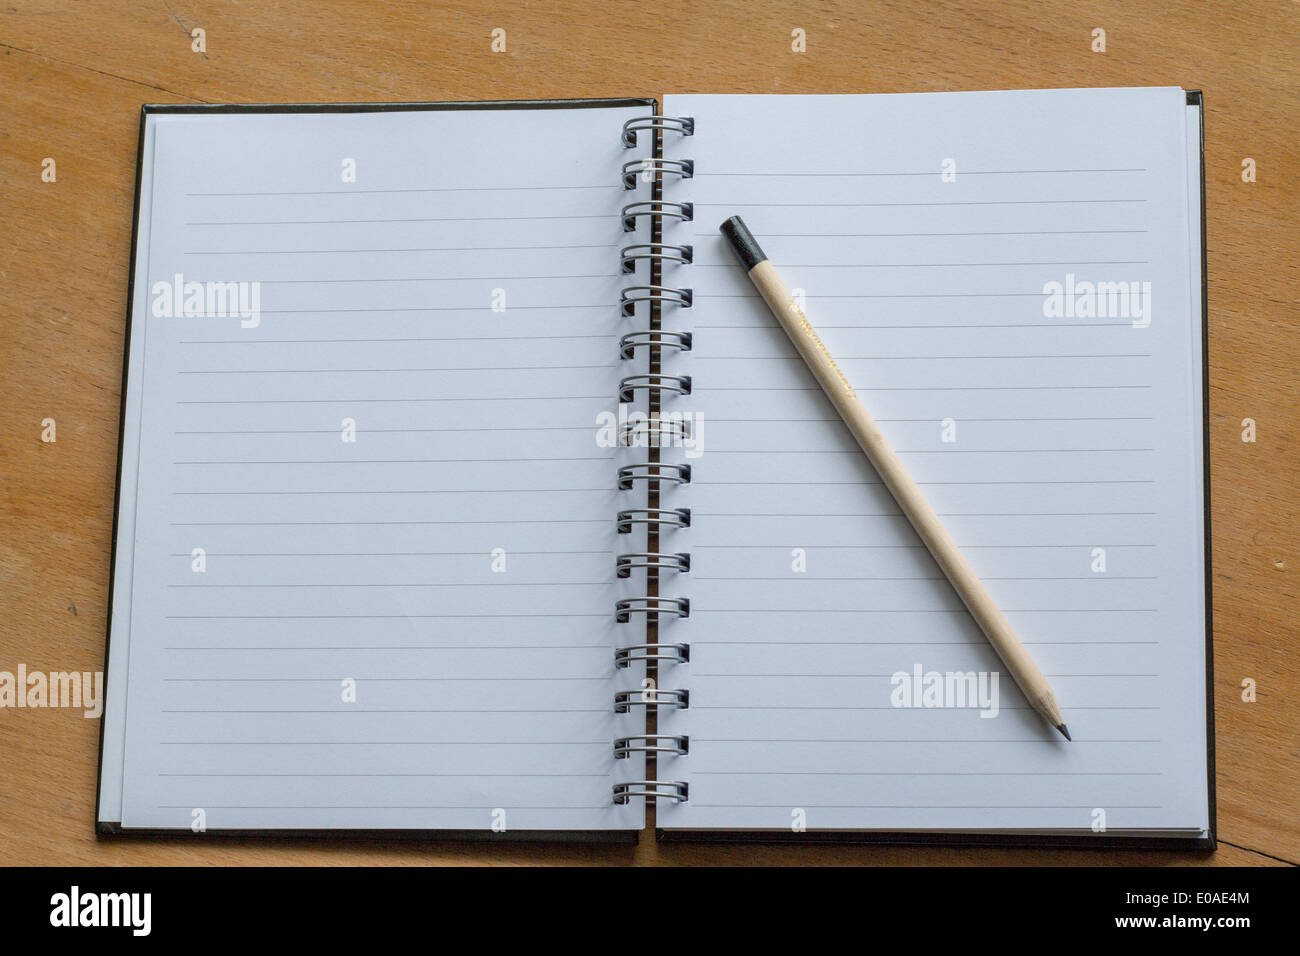 Open notebook on desk with a pencil Stock Photo